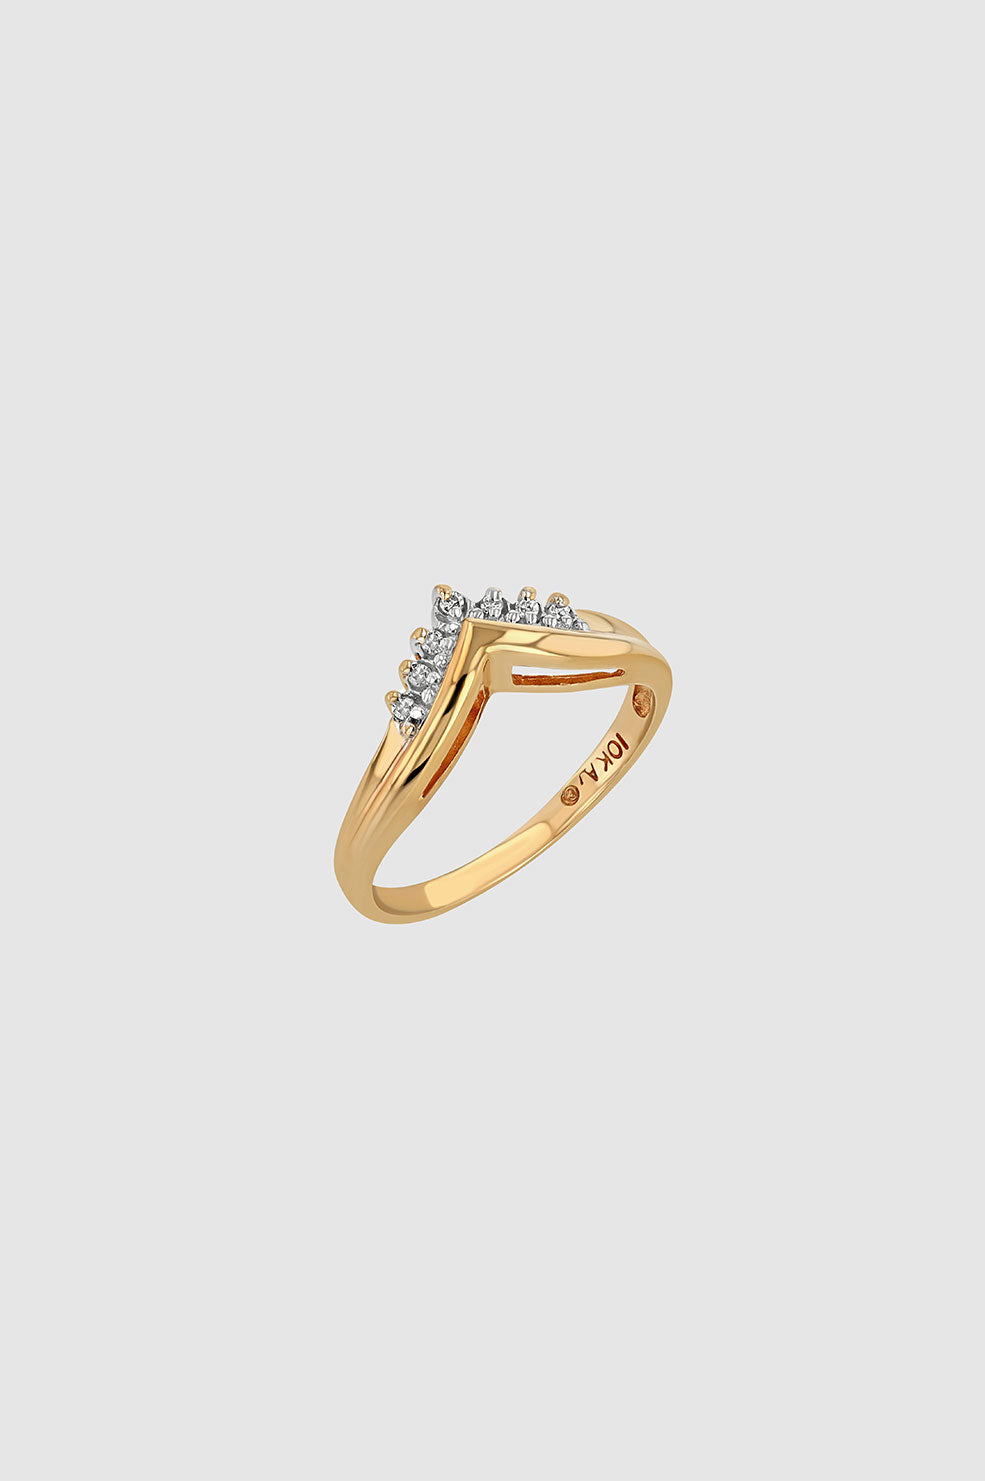 ANINE BING Curved Diamond Ring - 14k Gold - Top View